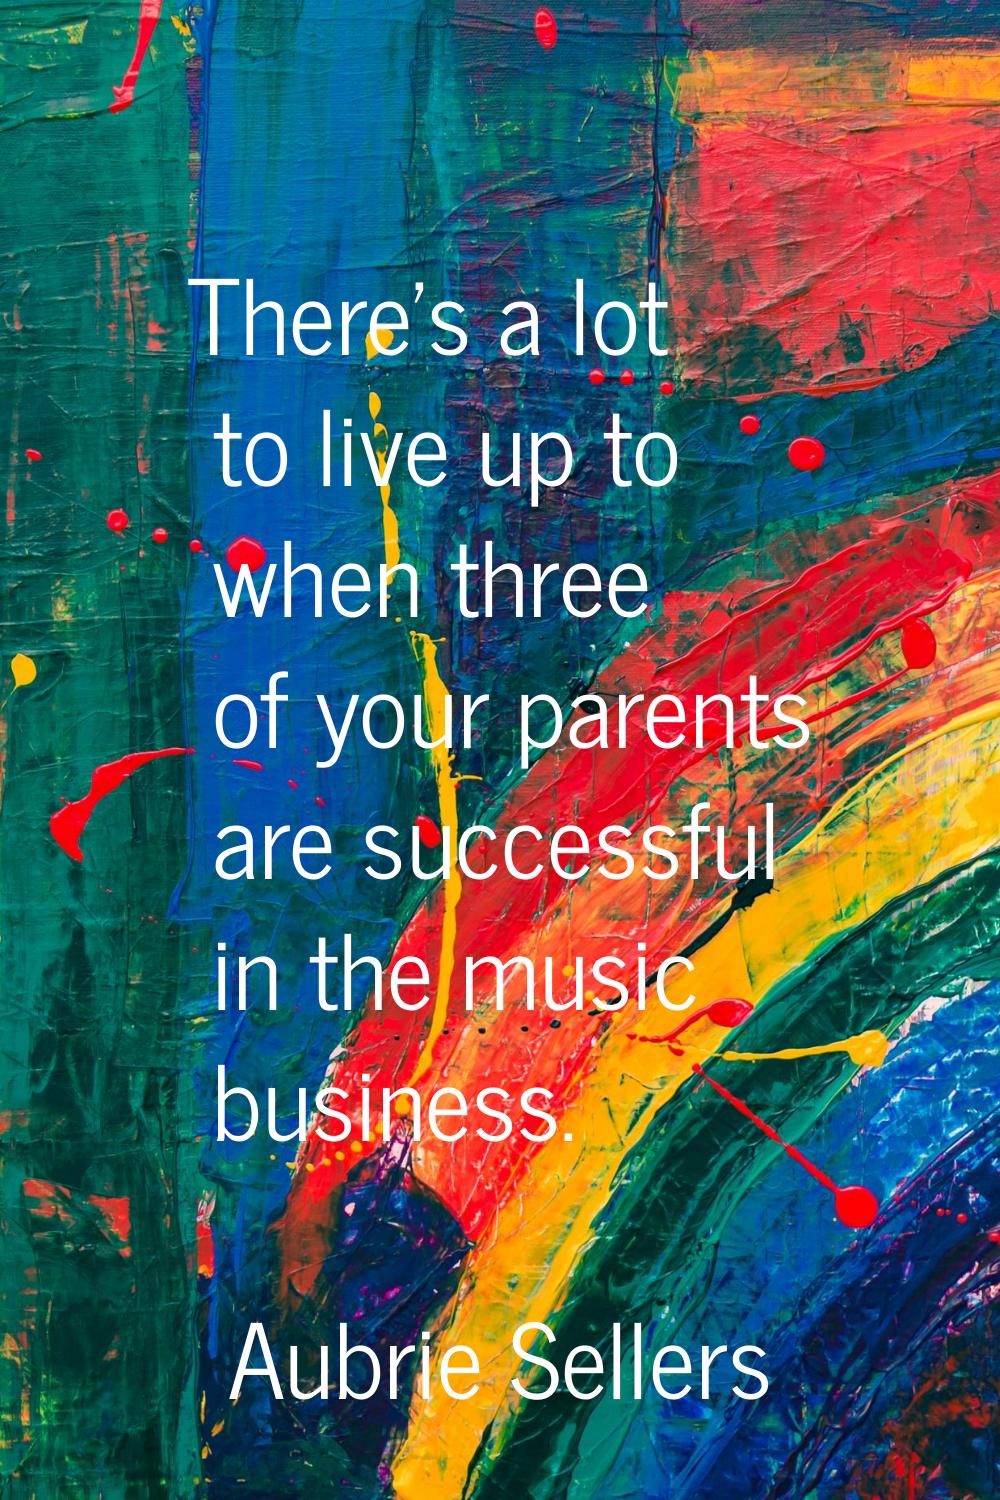 There's a lot to live up to when three of your parents are successful in the music business.